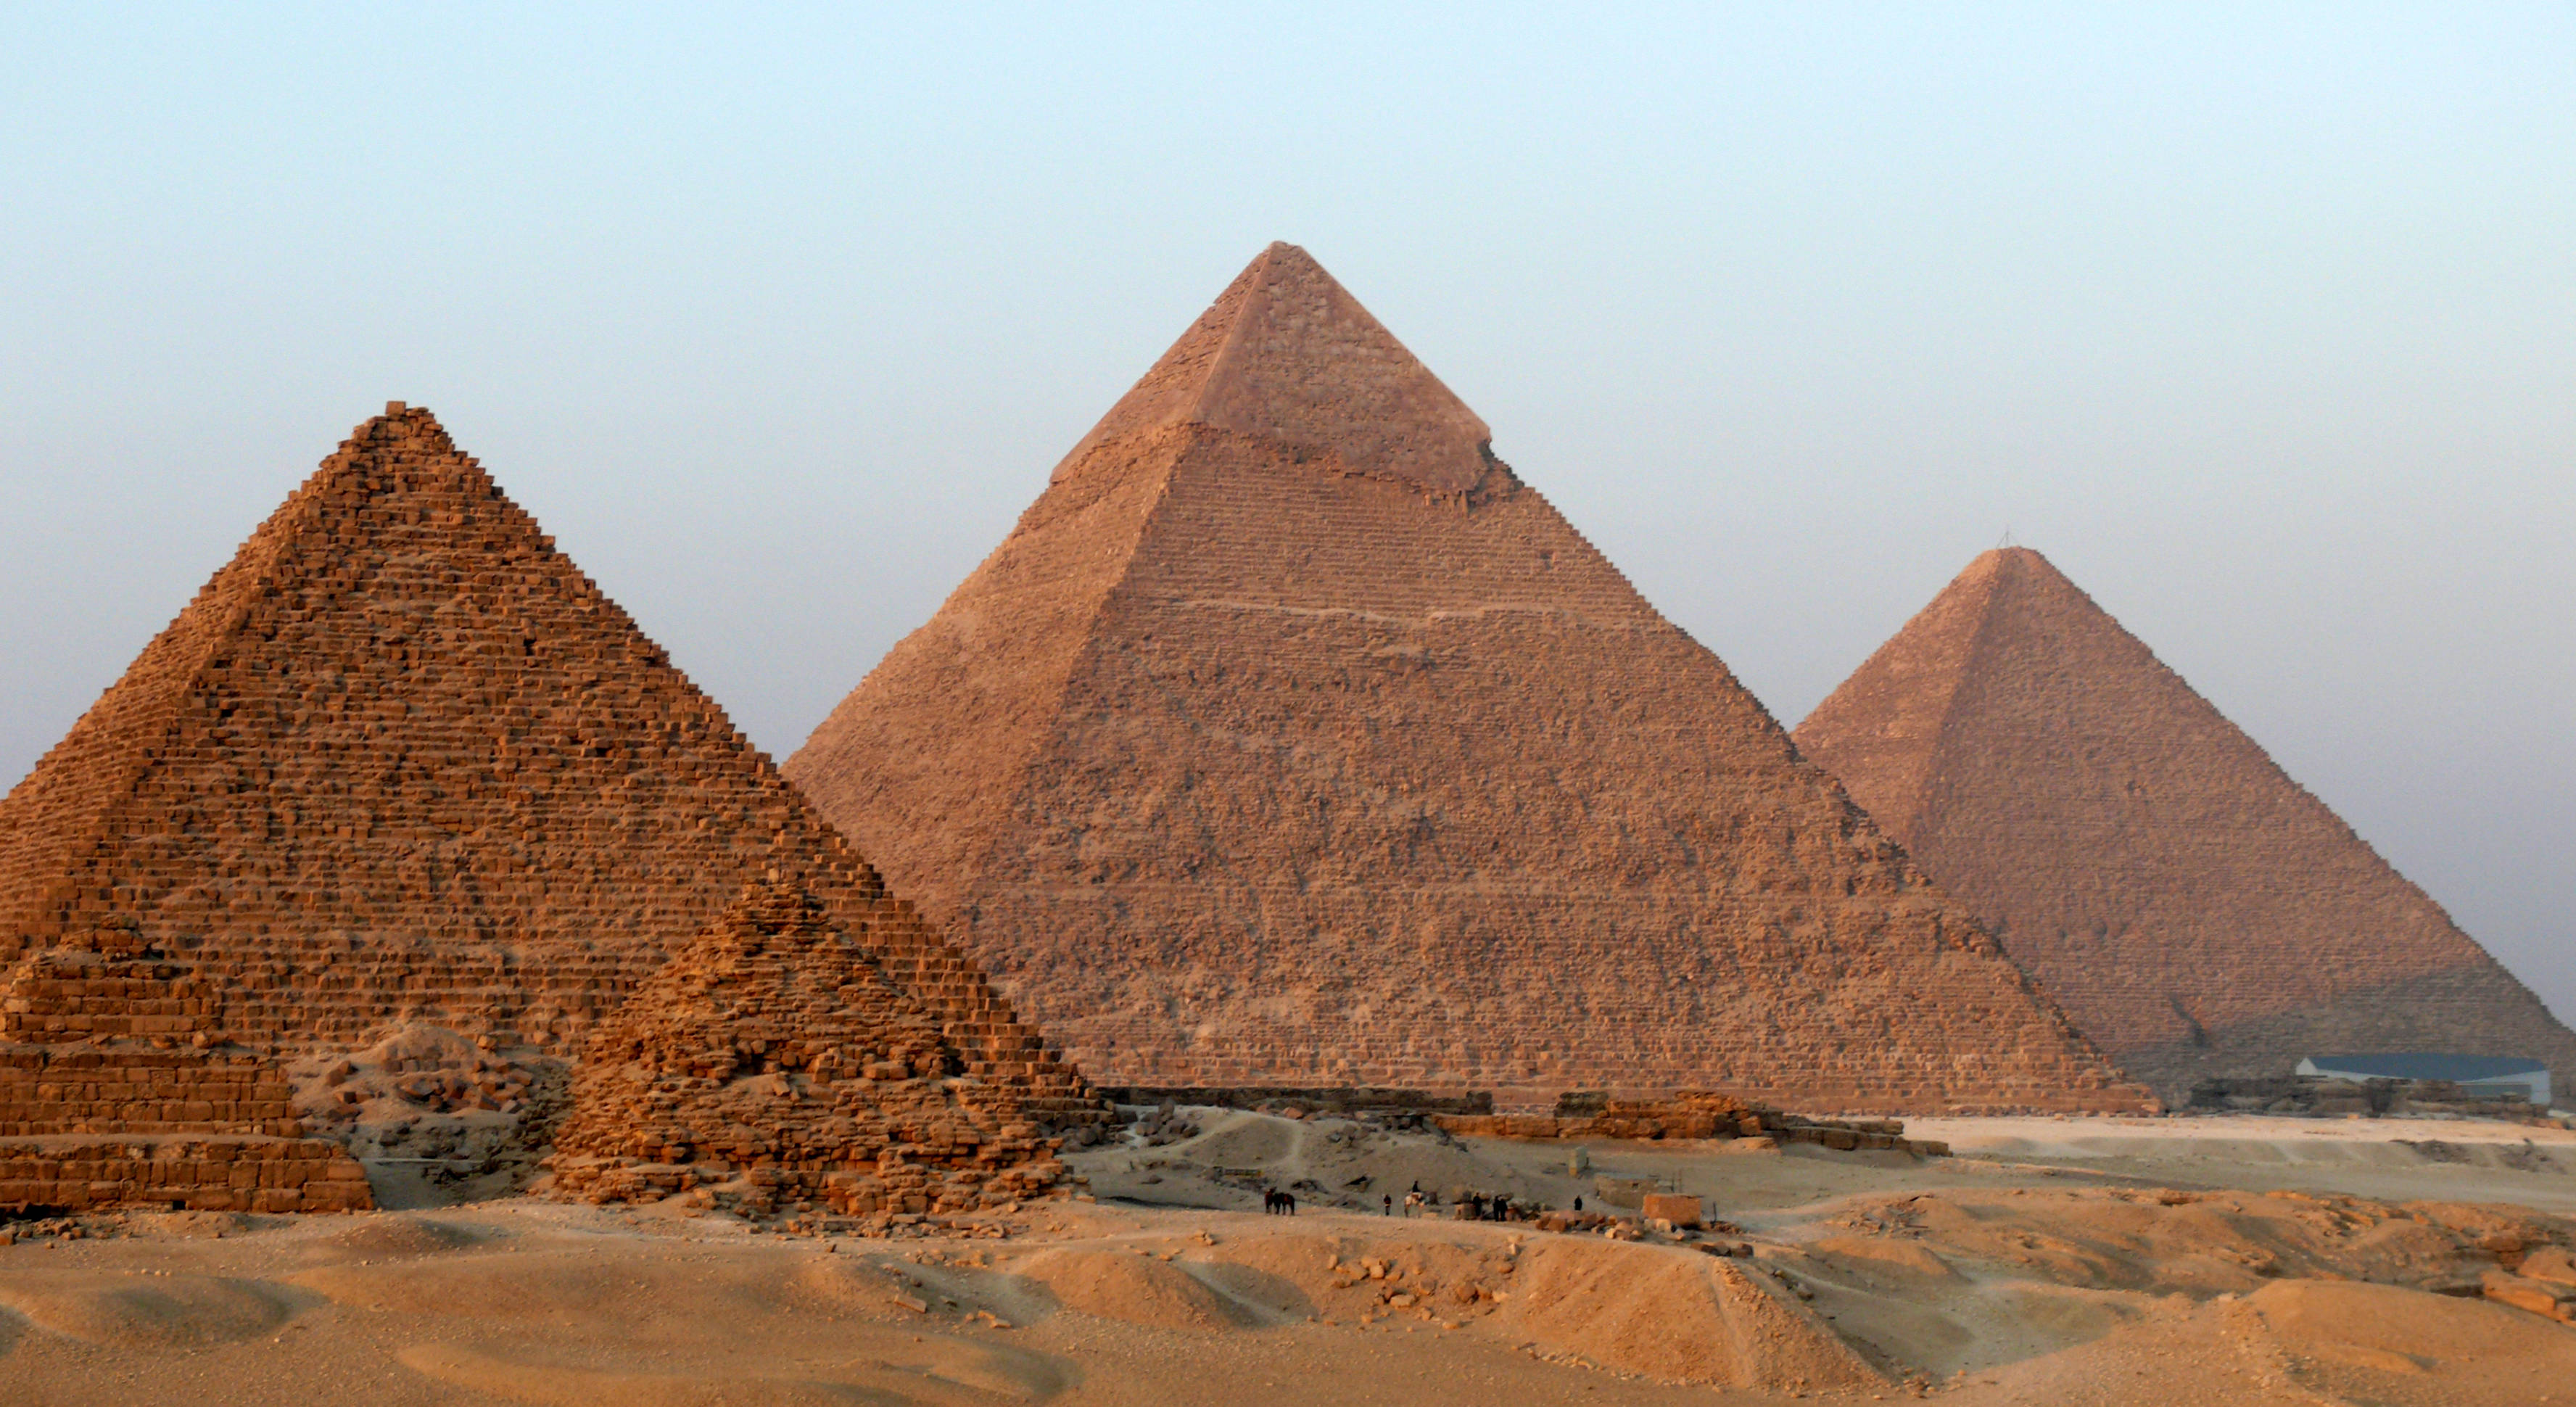 Egyptian Pyramids Wallpaper, HD Egyptian Pyramids Background, Free Image Download